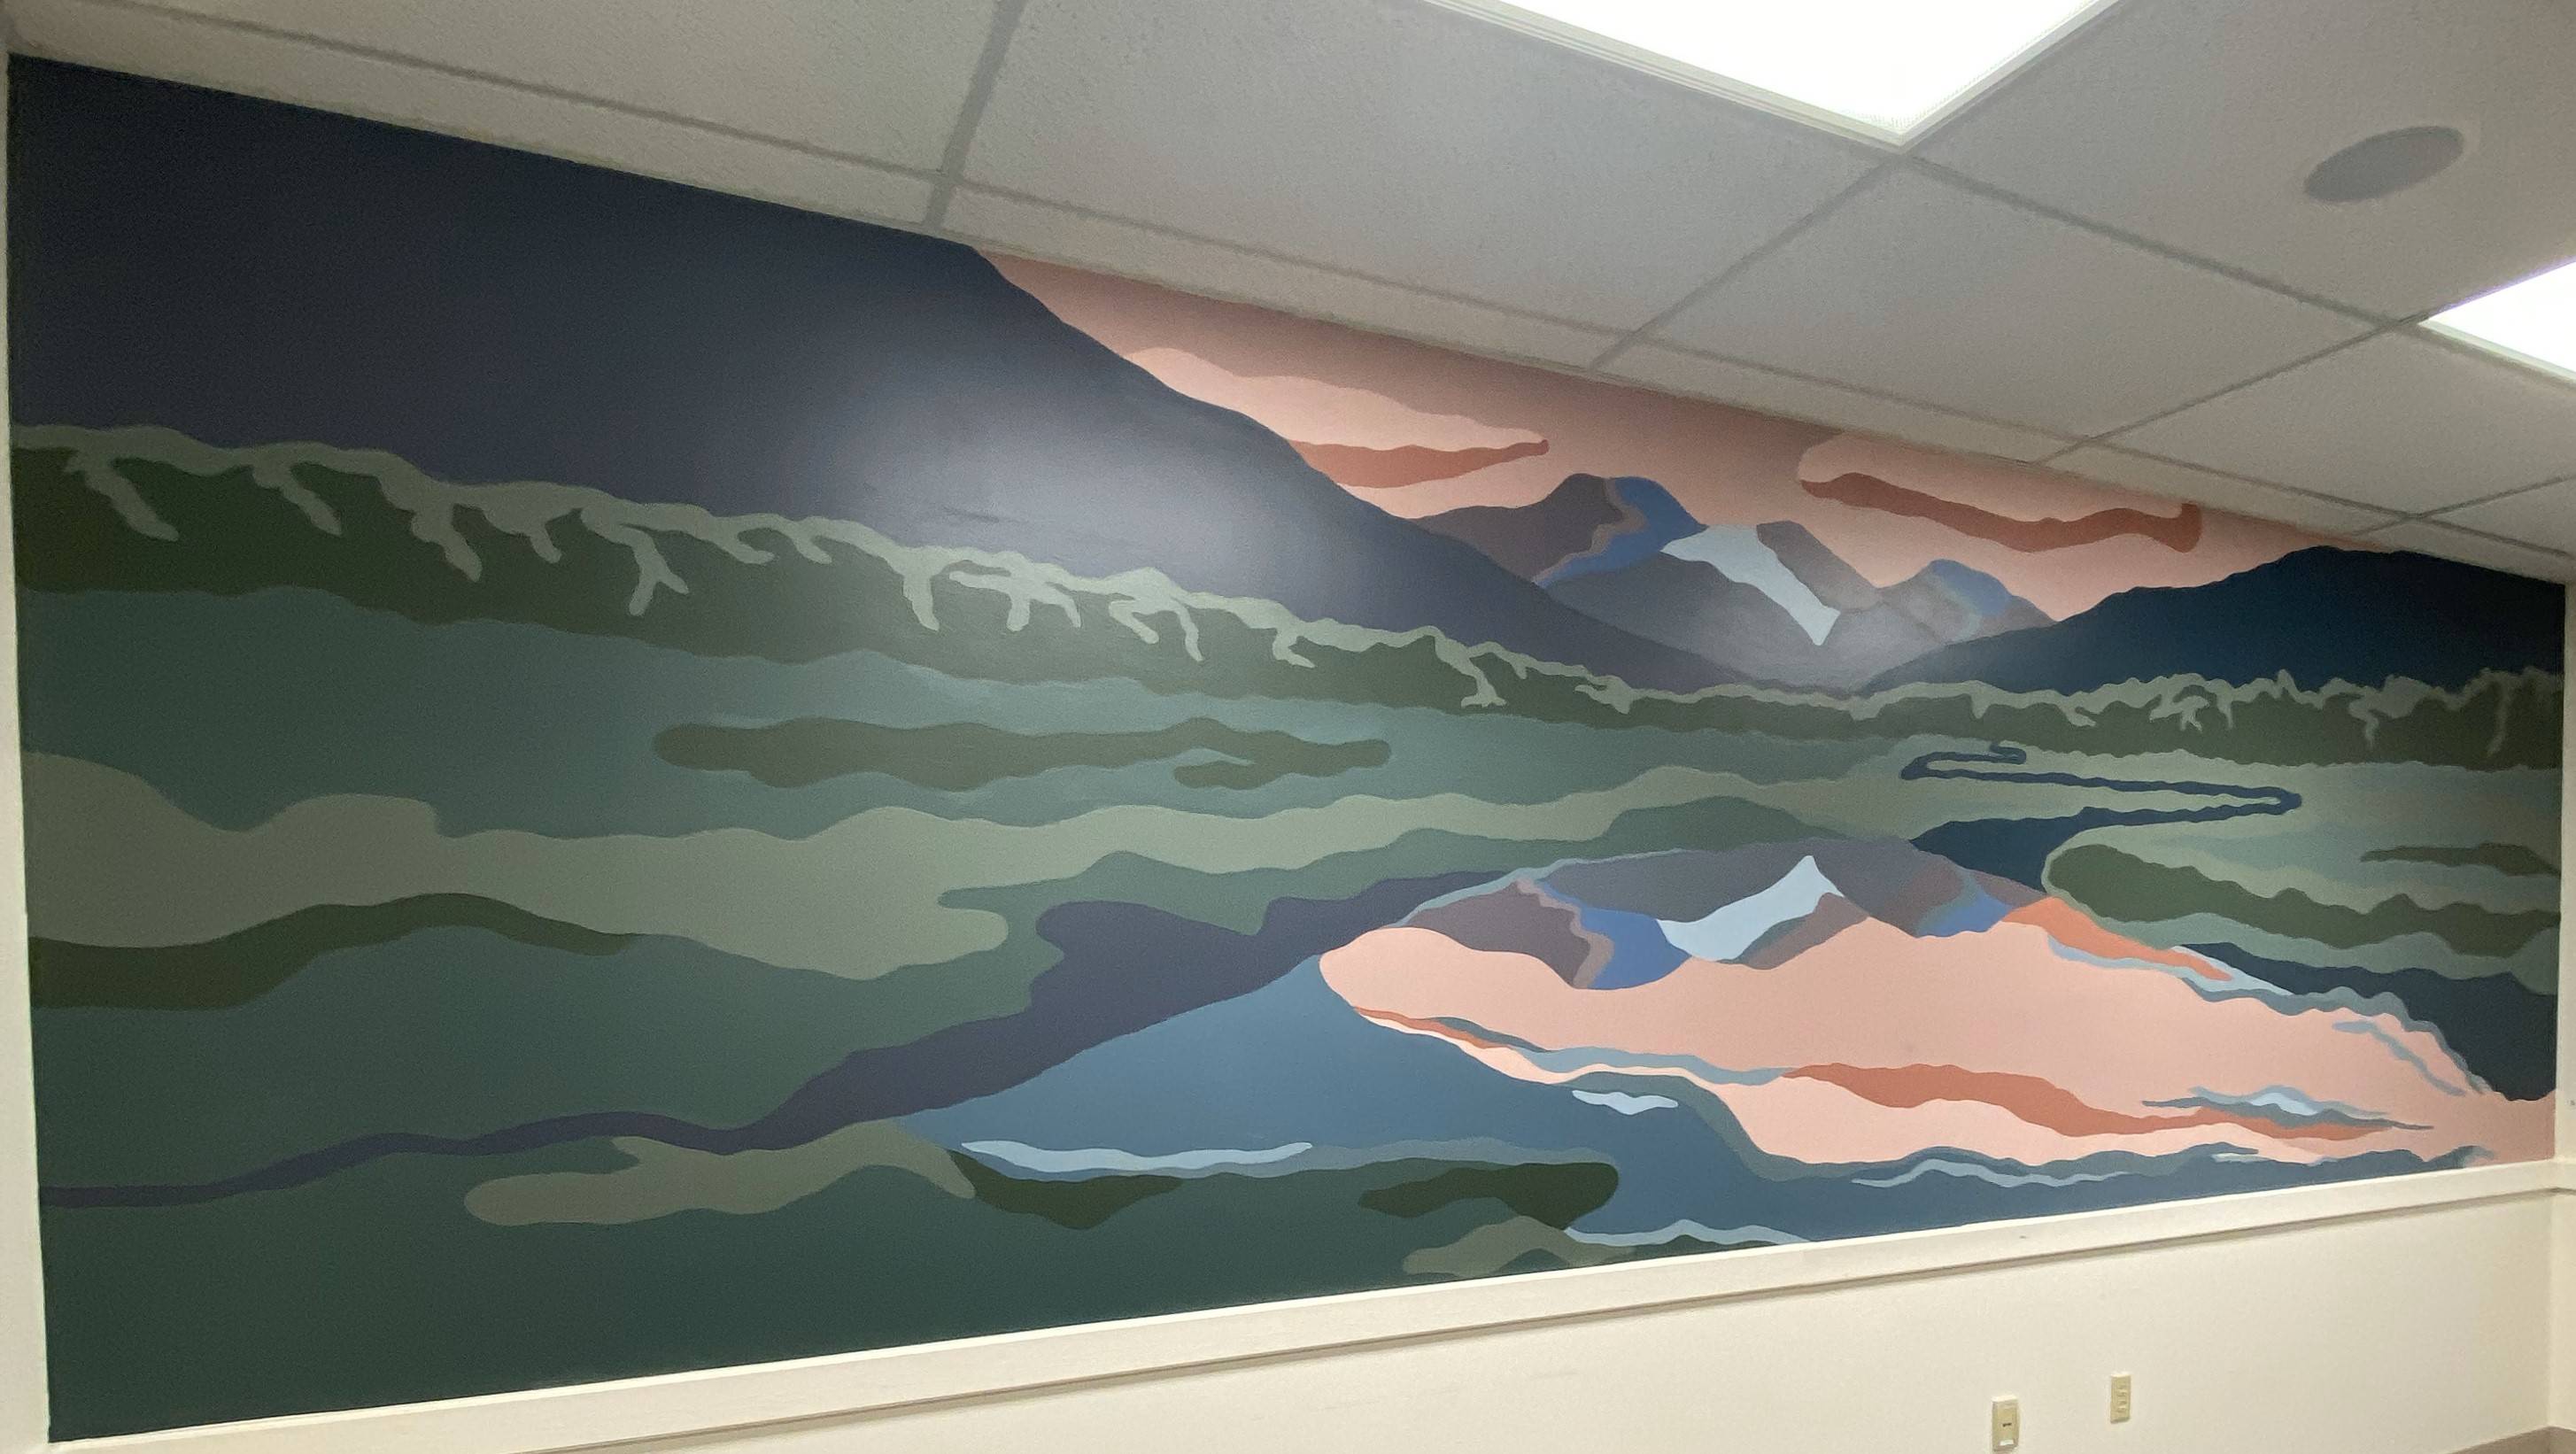 A mural of a landscape